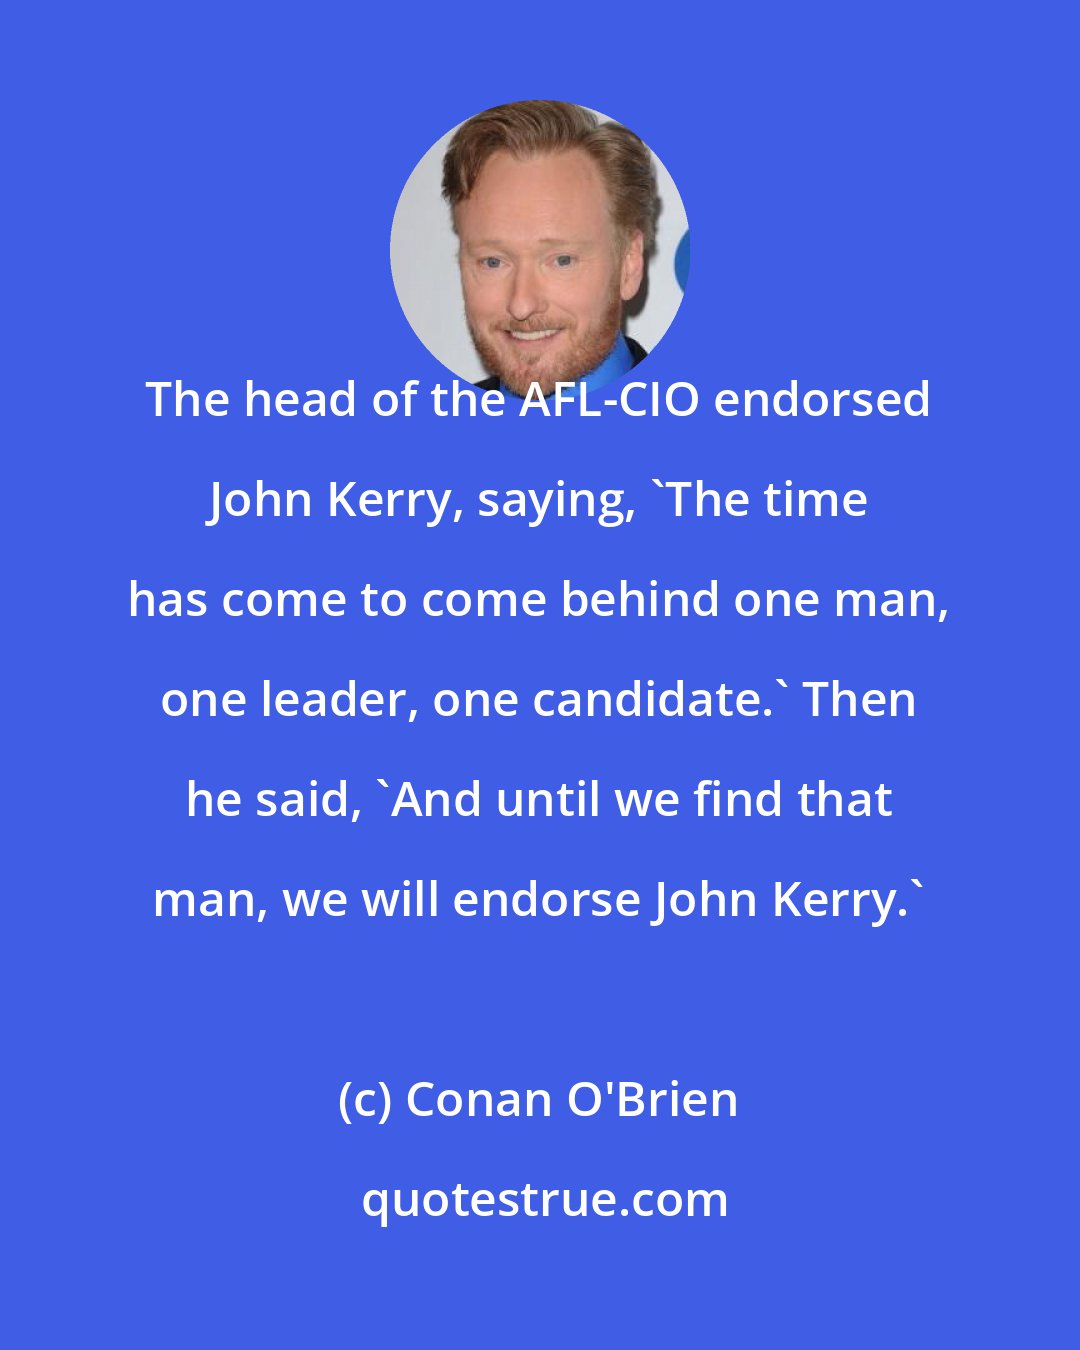 Conan O'Brien: The head of the AFL-CIO endorsed John Kerry, saying, 'The time has come to come behind one man, one leader, one candidate.' Then he said, 'And until we find that man, we will endorse John Kerry.'